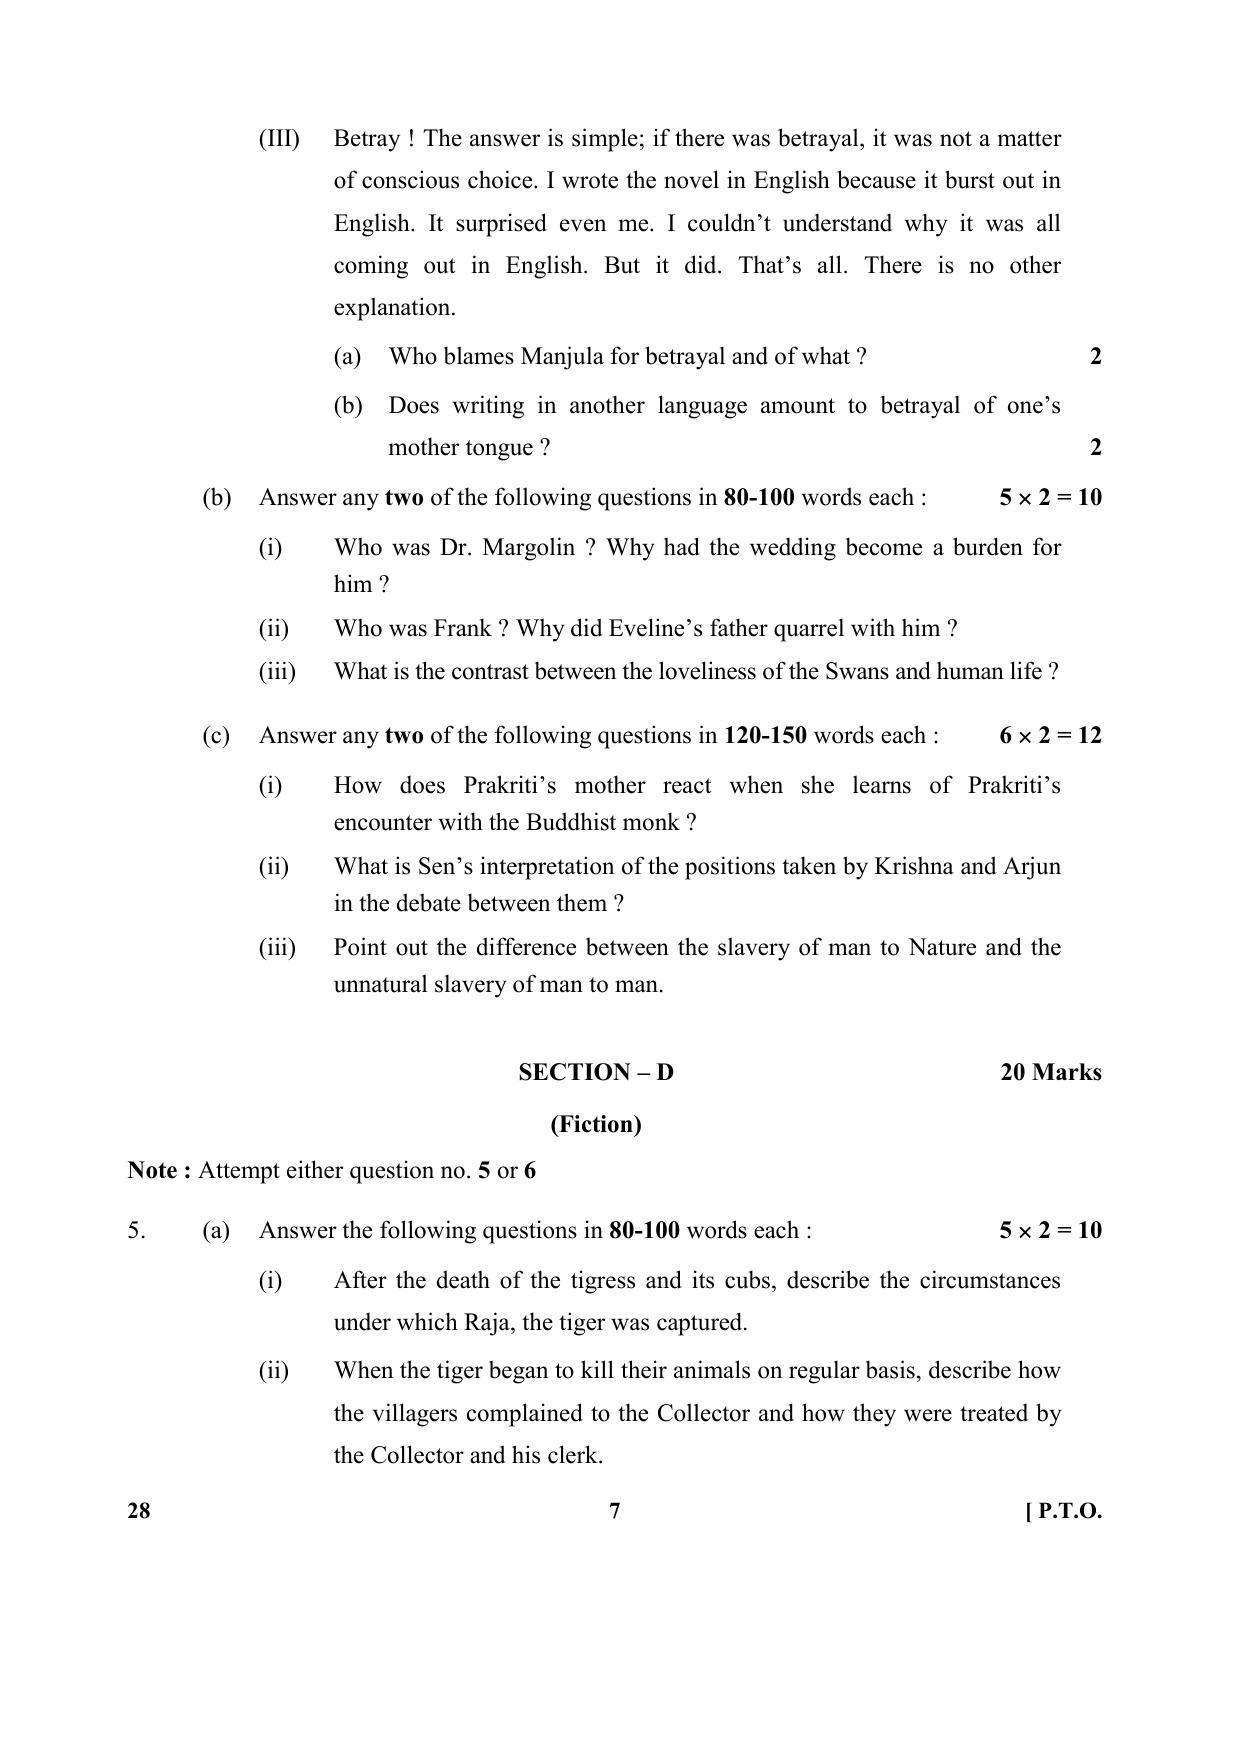 CBSE Class 12 28 (English) Elec 2017-comptt Question Paper - Page 7